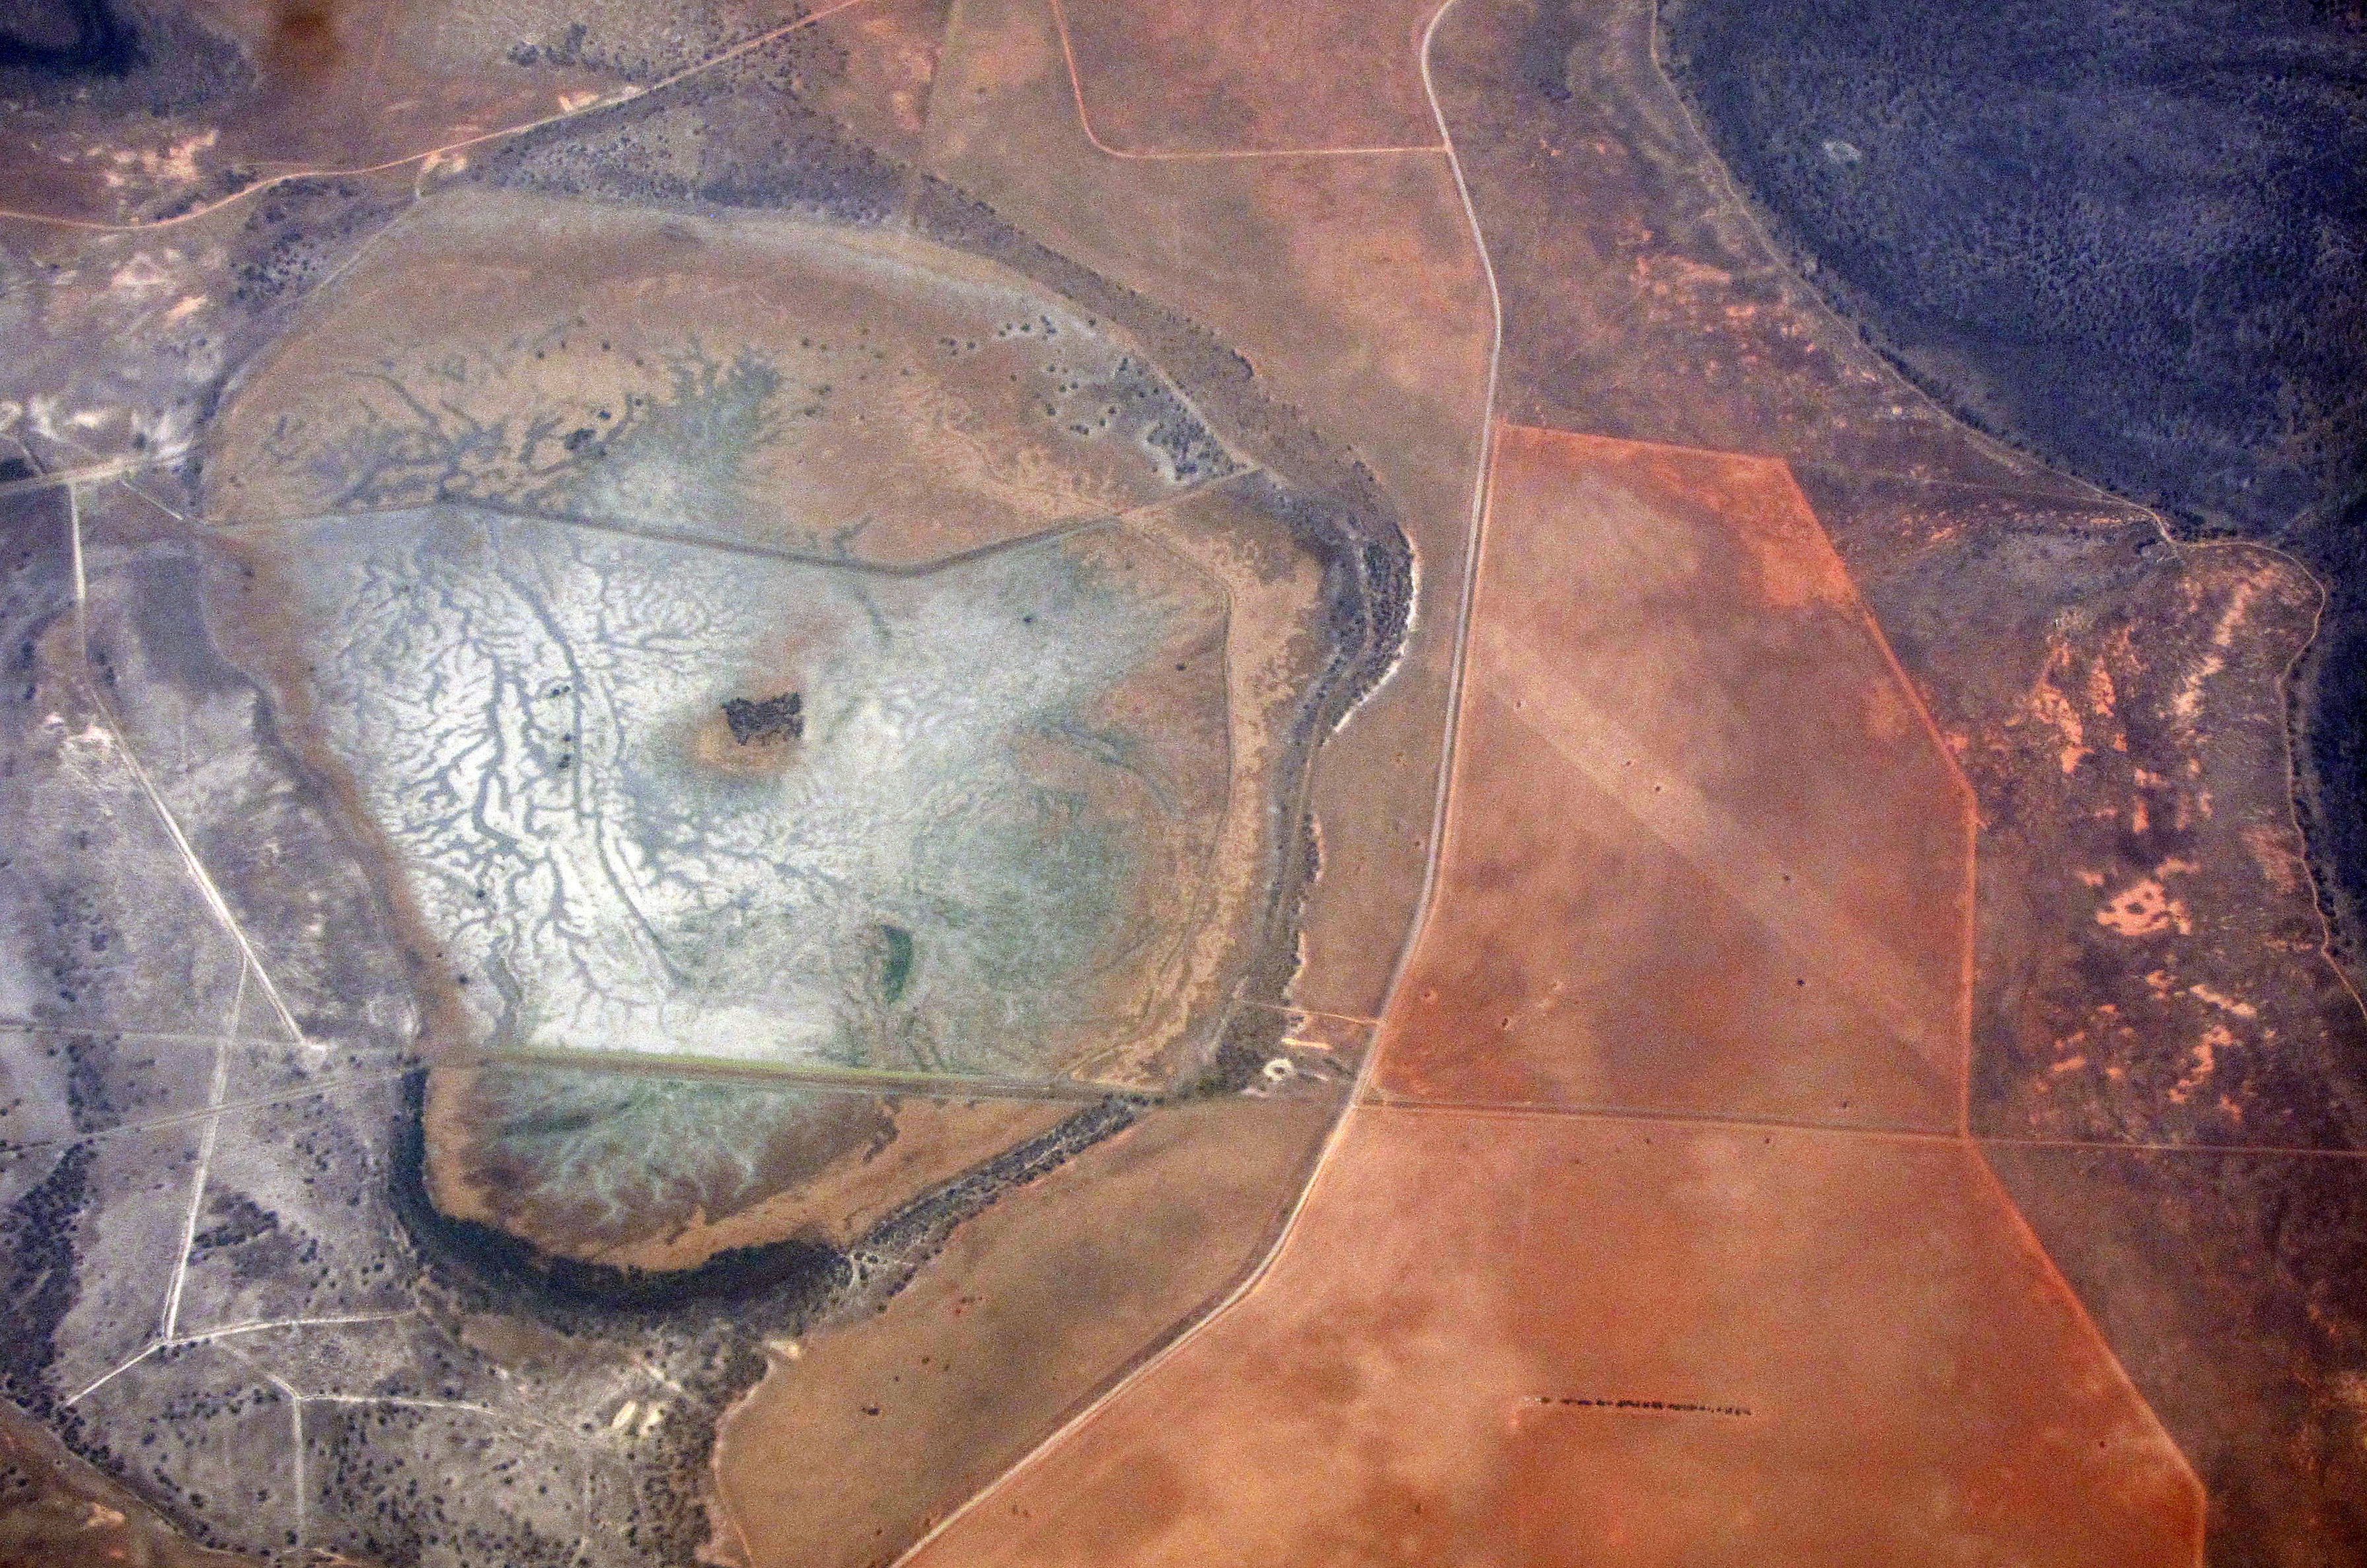 A salt-affected water catchment area can be seen amongst drought affected farmland in south Australia, November 26, 2015. This year will be the hottest on record and 2016 could be even hotter due to the El Niño weather pattern, the World Meteorological Organization said on Wednesday, warning that inaction on climate change could see global average temperatures rise by 6 degrees Celsius or more. Global ocean temperatures were unprecedented during the period, and several land areas, including the continental United States, Australia, Europe, South America and Russia, broke temperature records by large margins.    REUTERS/David Gray